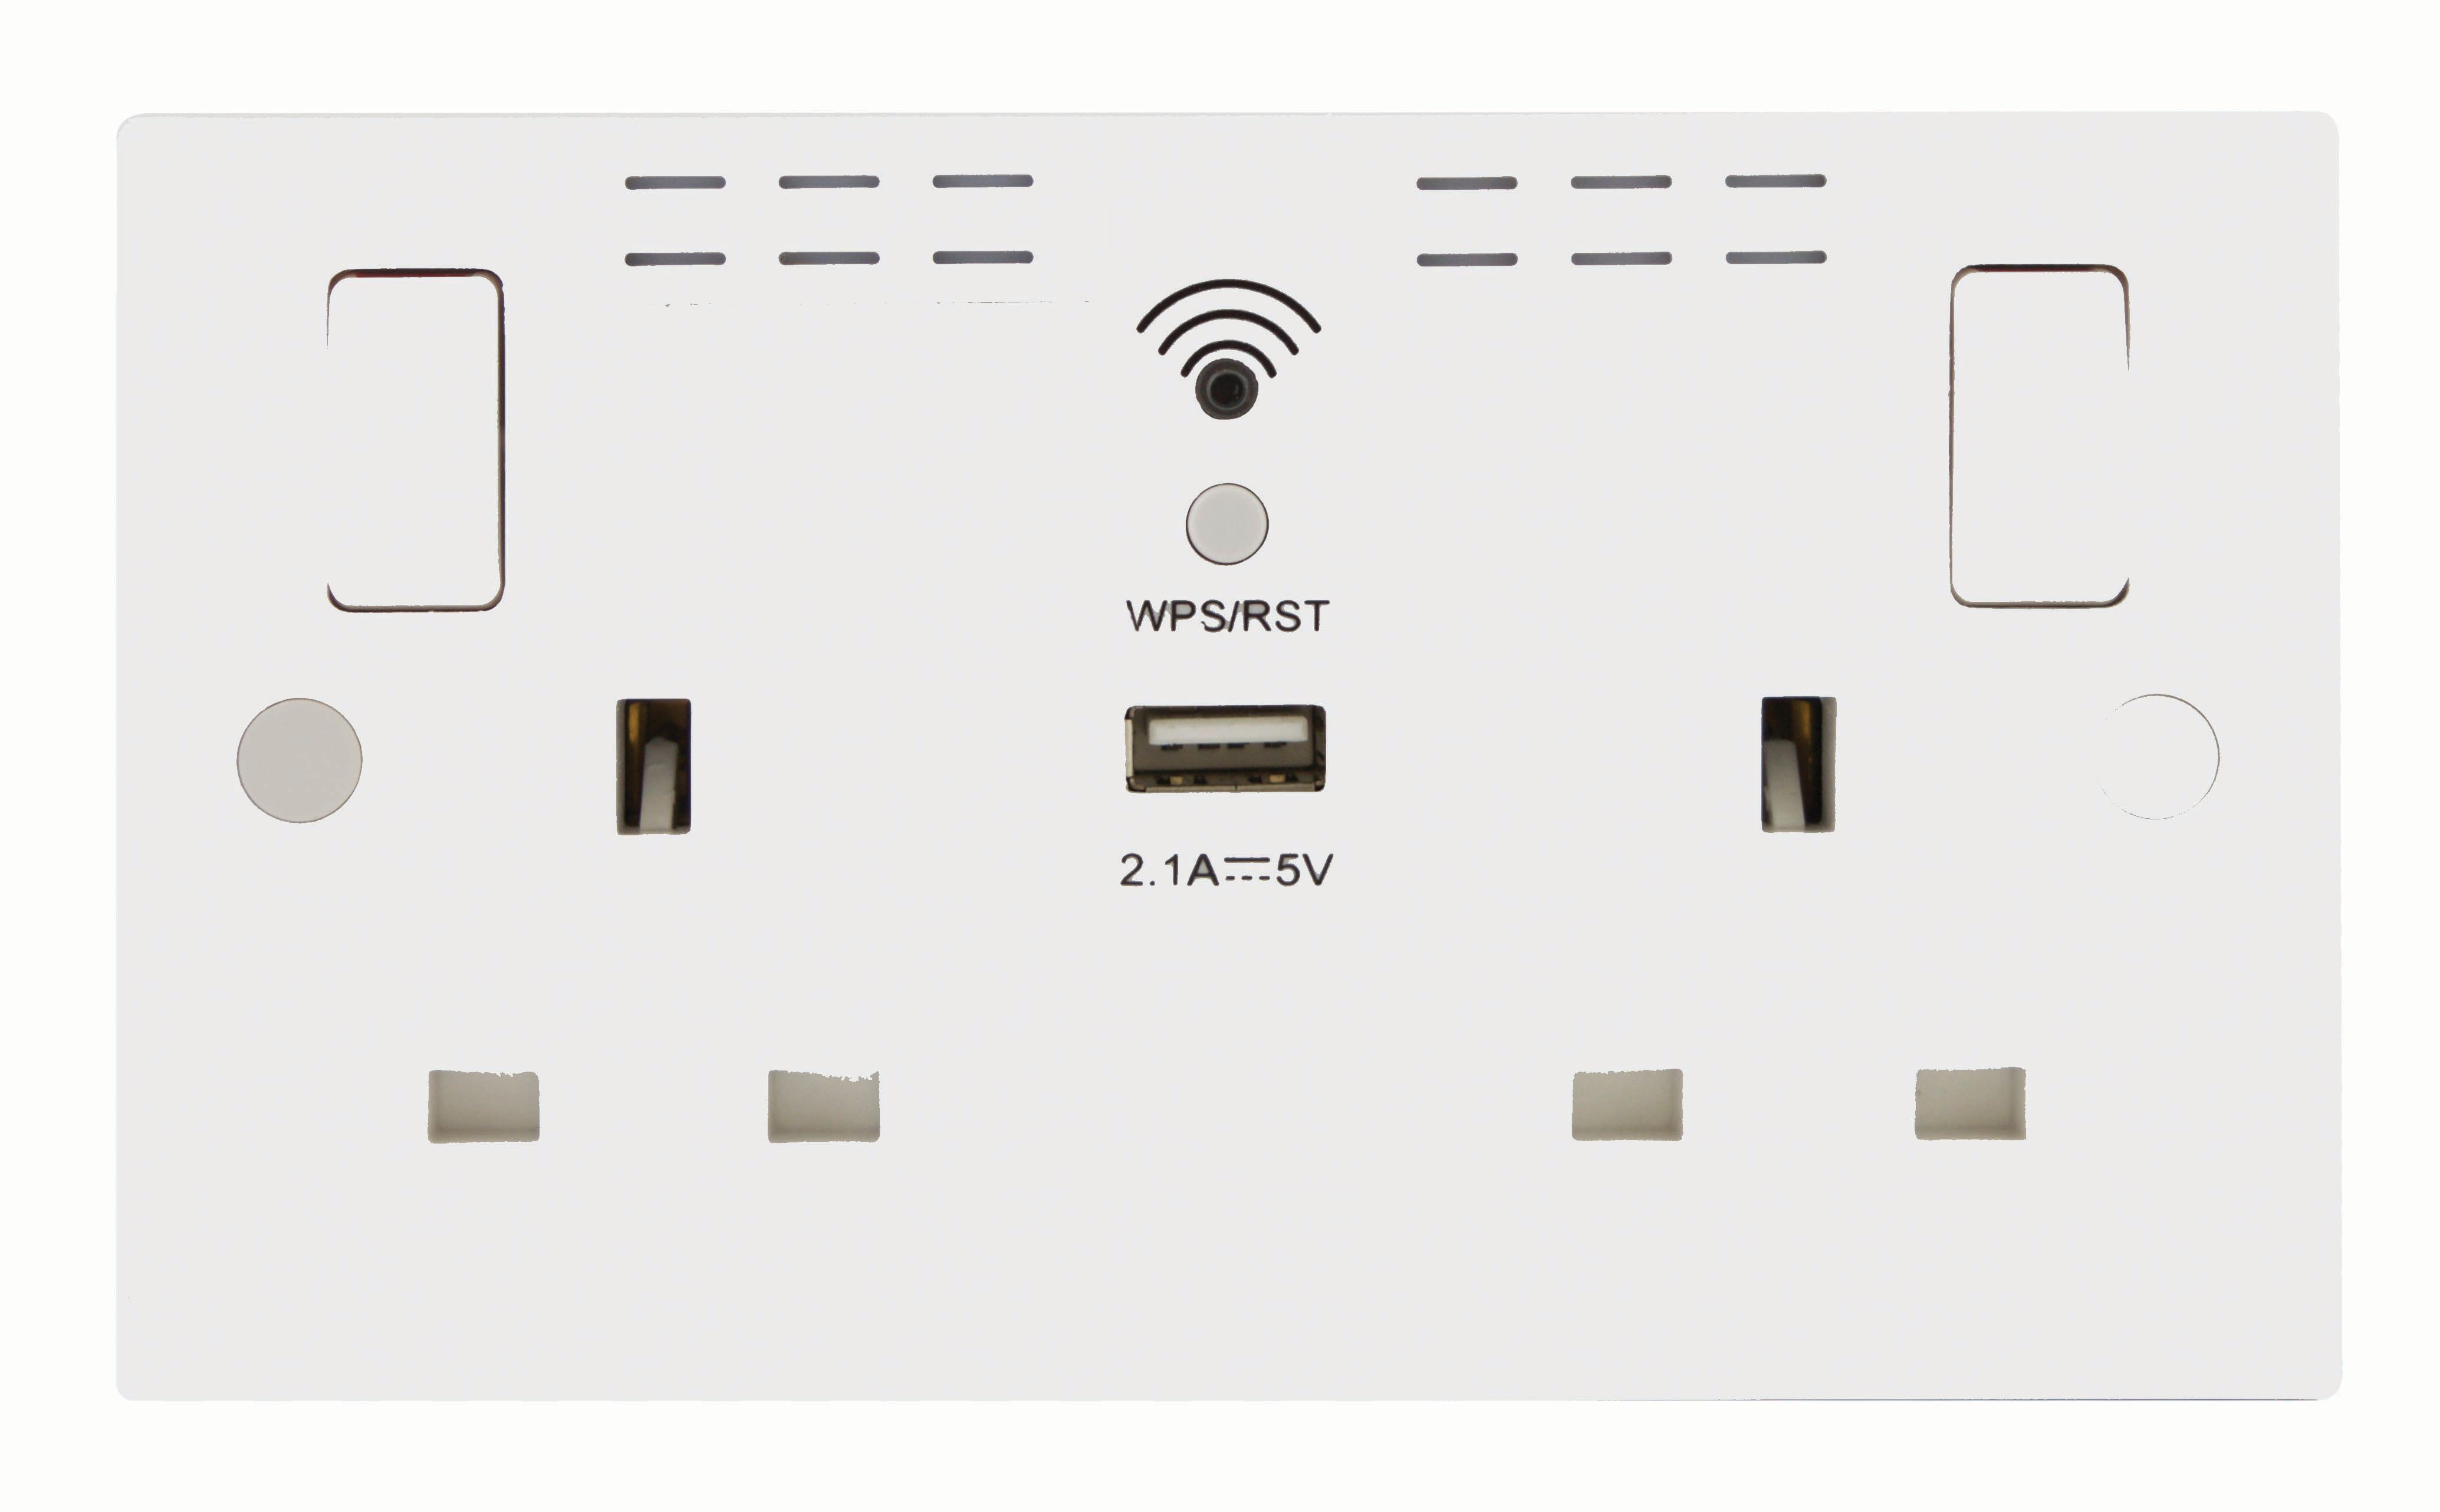 BG 13 AmpTwin Switched Wi-Fi Range Extender Socket with 1 x USB Port - White